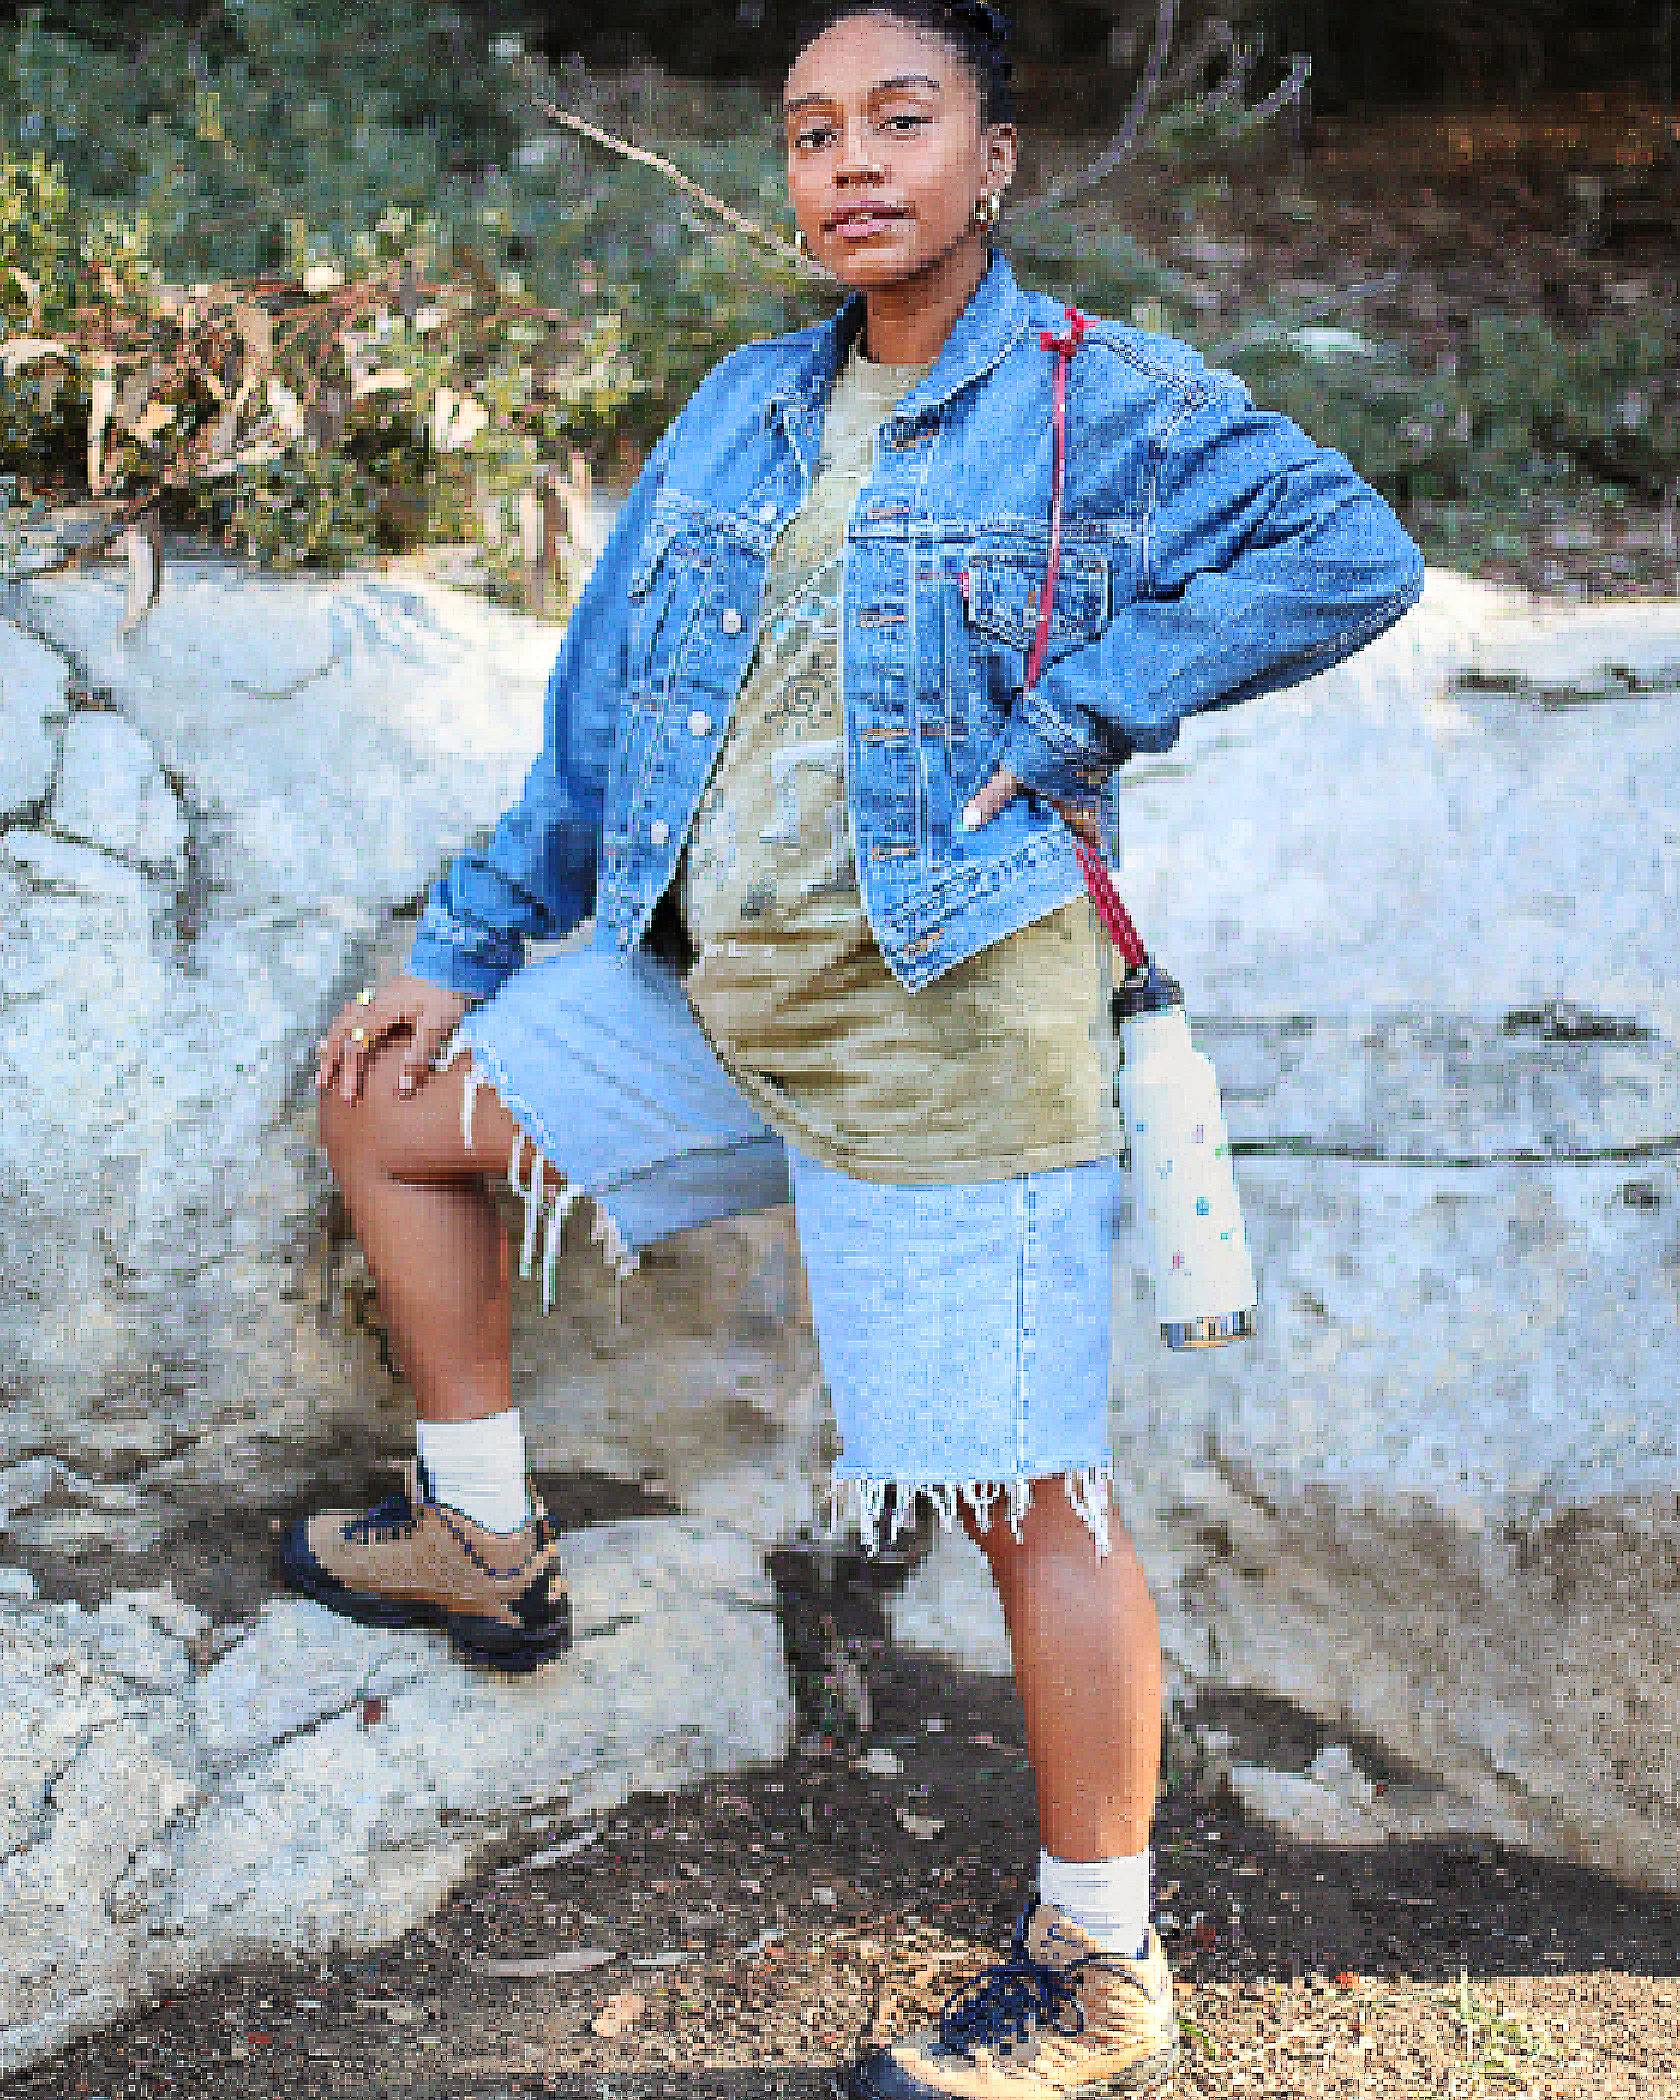 Photo of Evelynn Escobar-Thomas outdoors, wearing a Levi's Trucker Jacket, a tie-dye shirt, and denim cut-offs with hiking shoes.